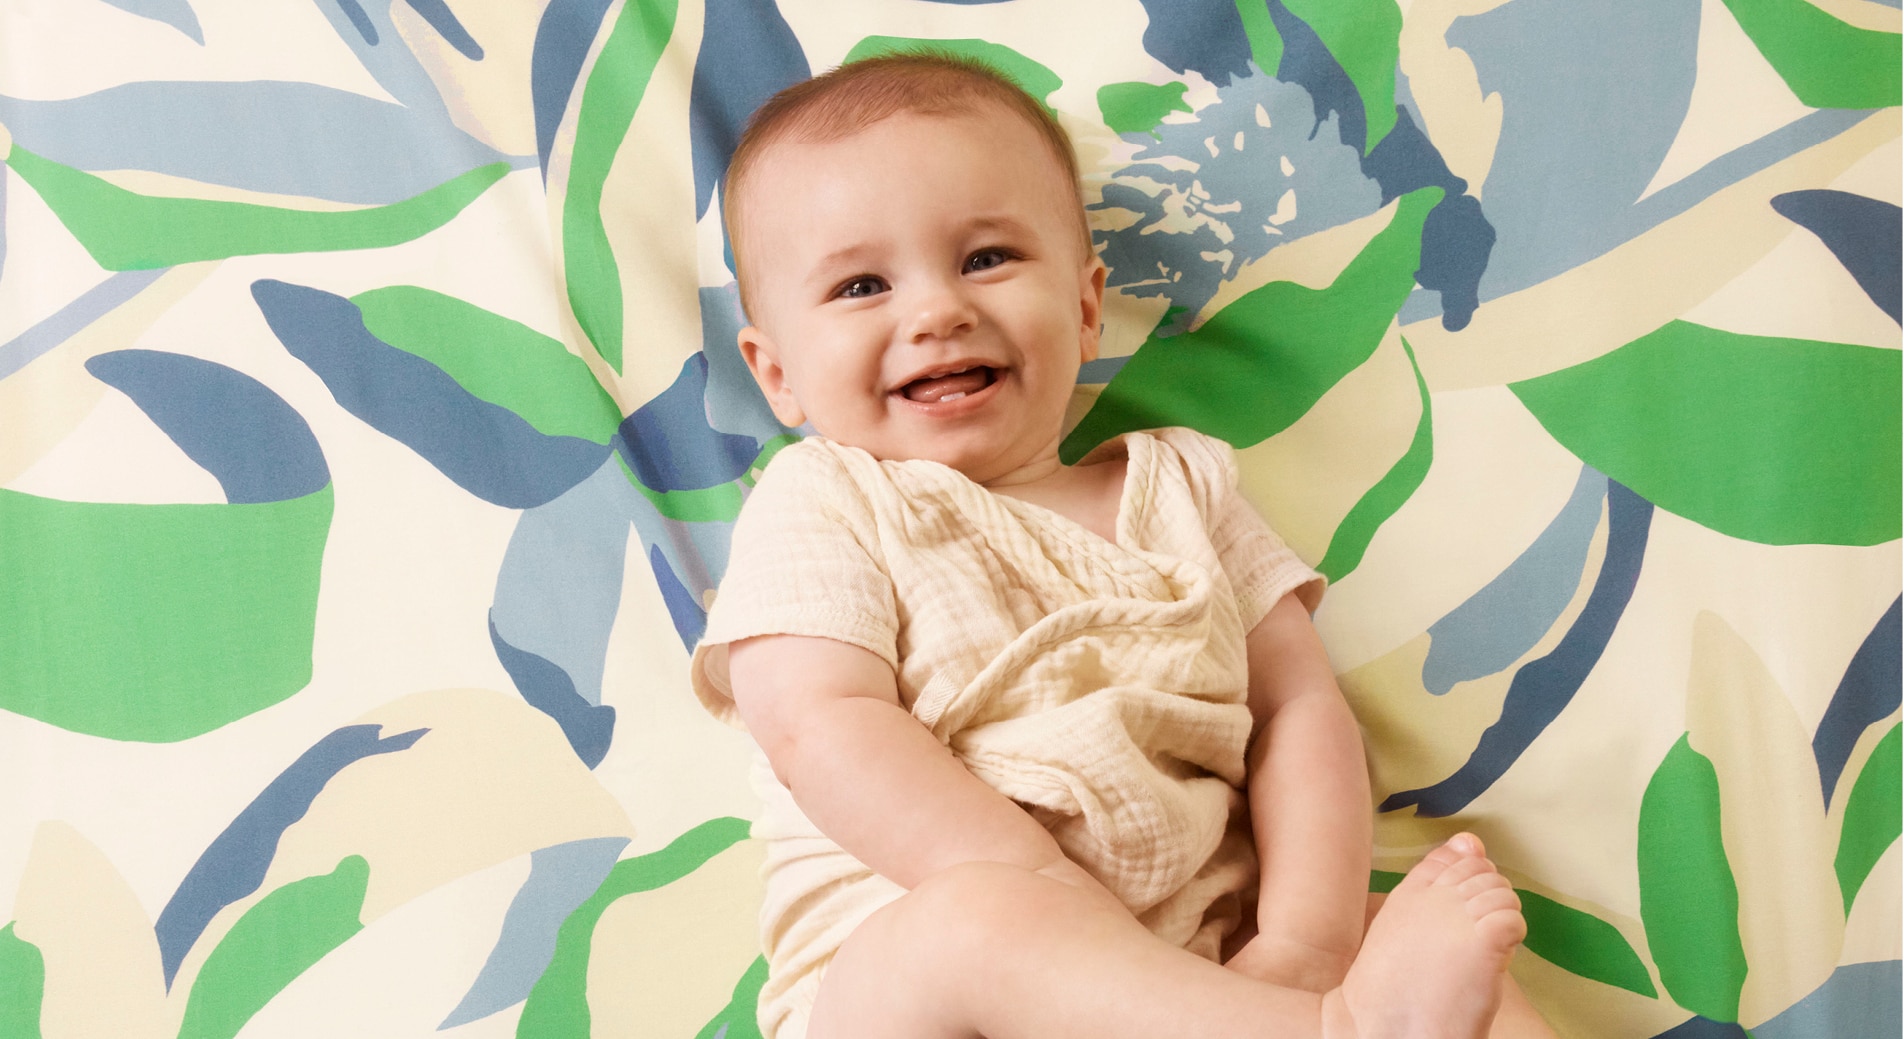 baby with gummy smile smiles up at camera. wearing neutral clothing, against sheridan mysie blanket with green blue and biege floral pattern in background